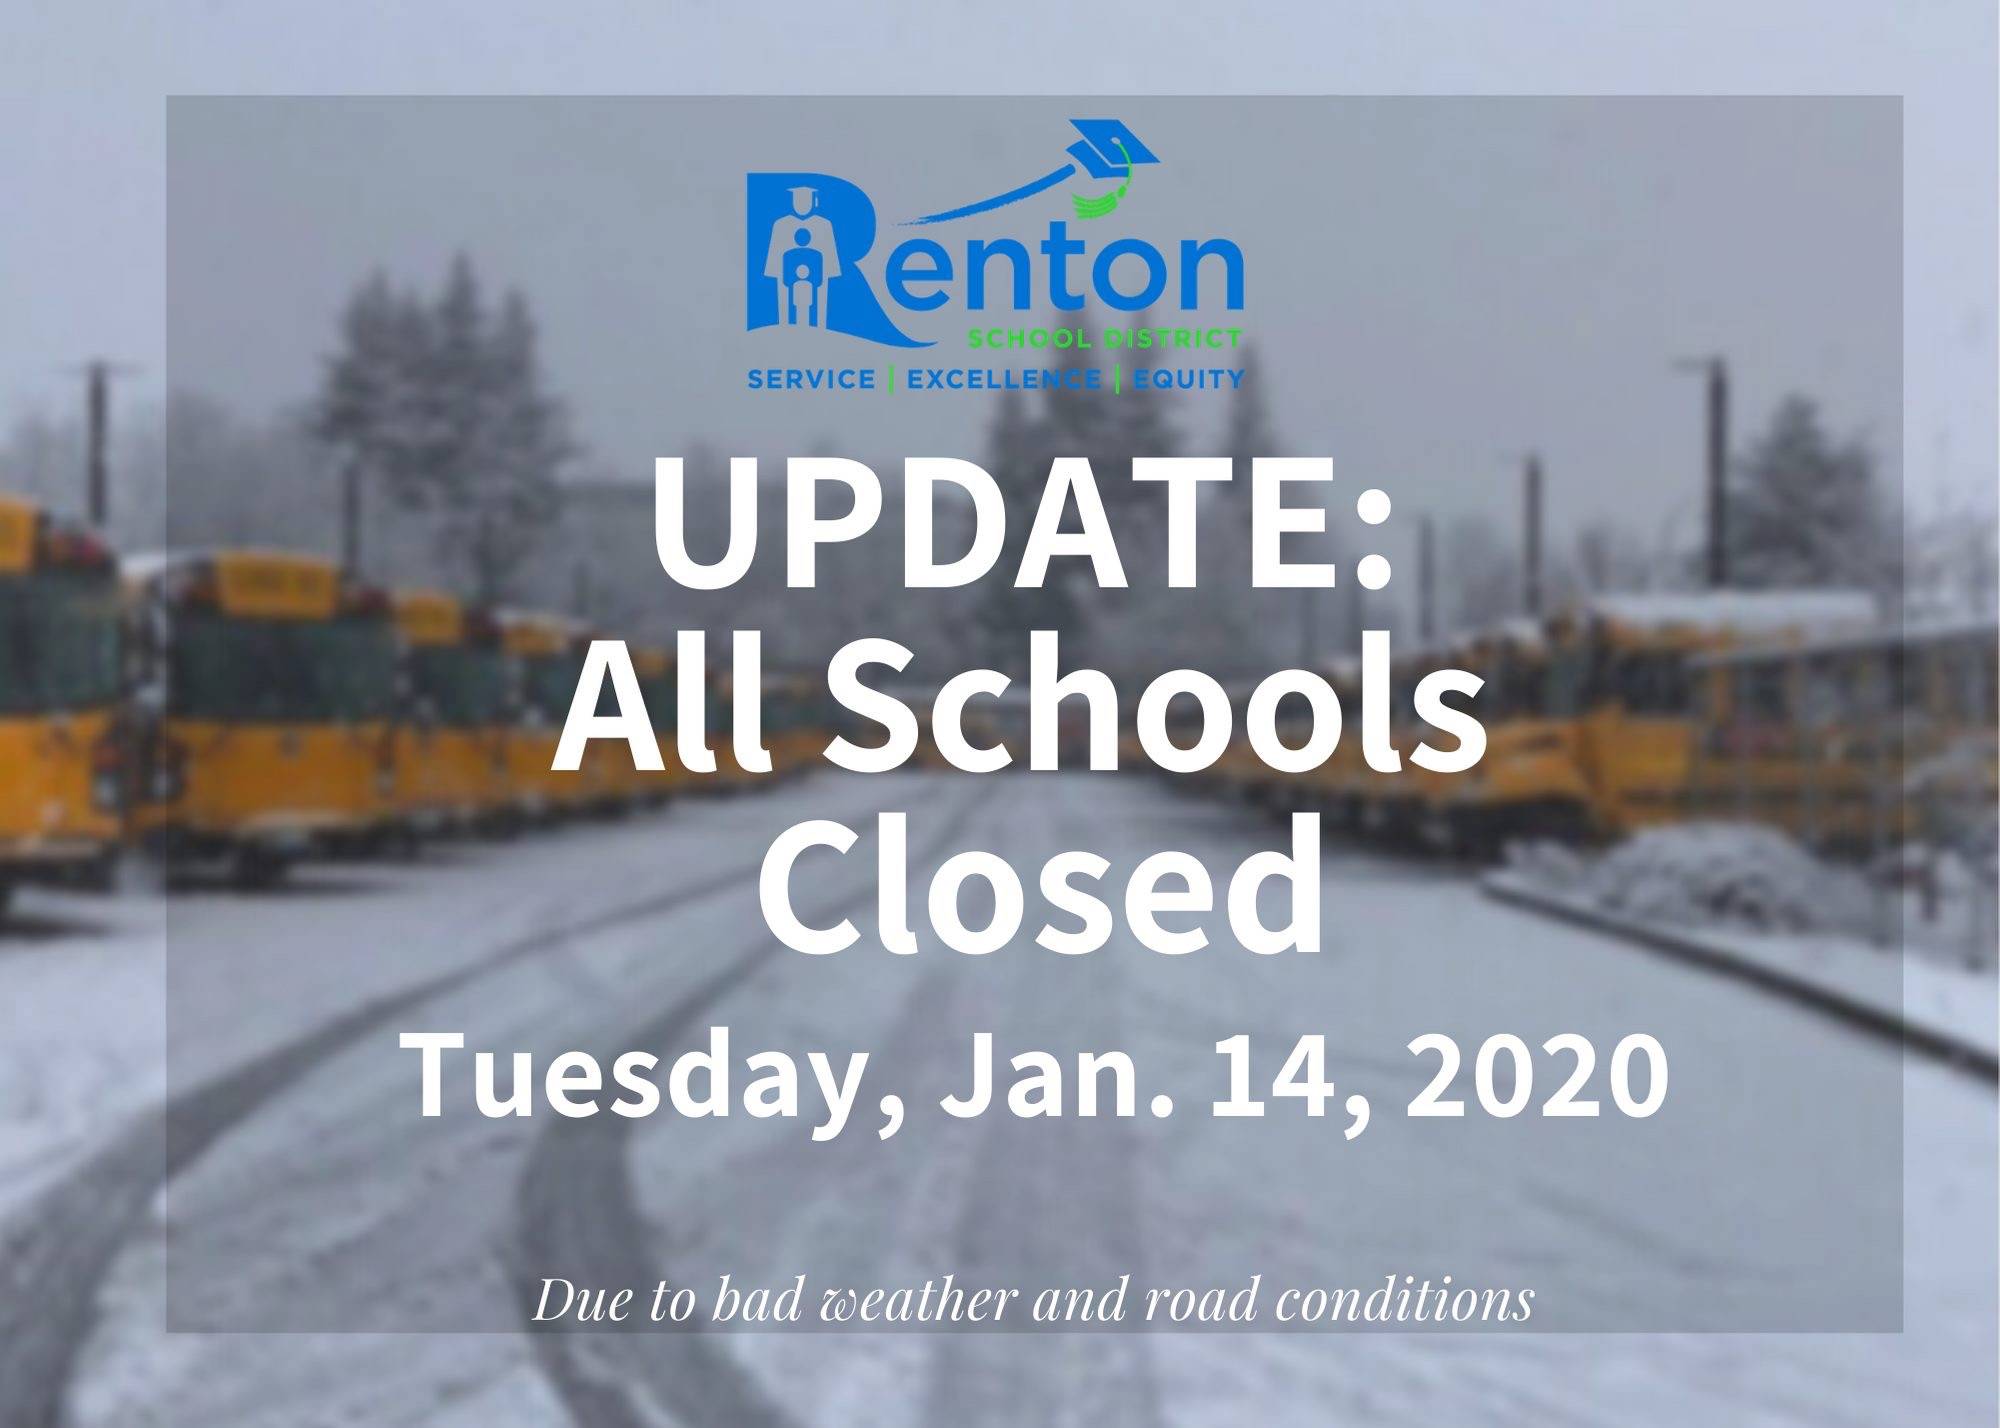 Renton schools closed Tuesday for icy road conditions